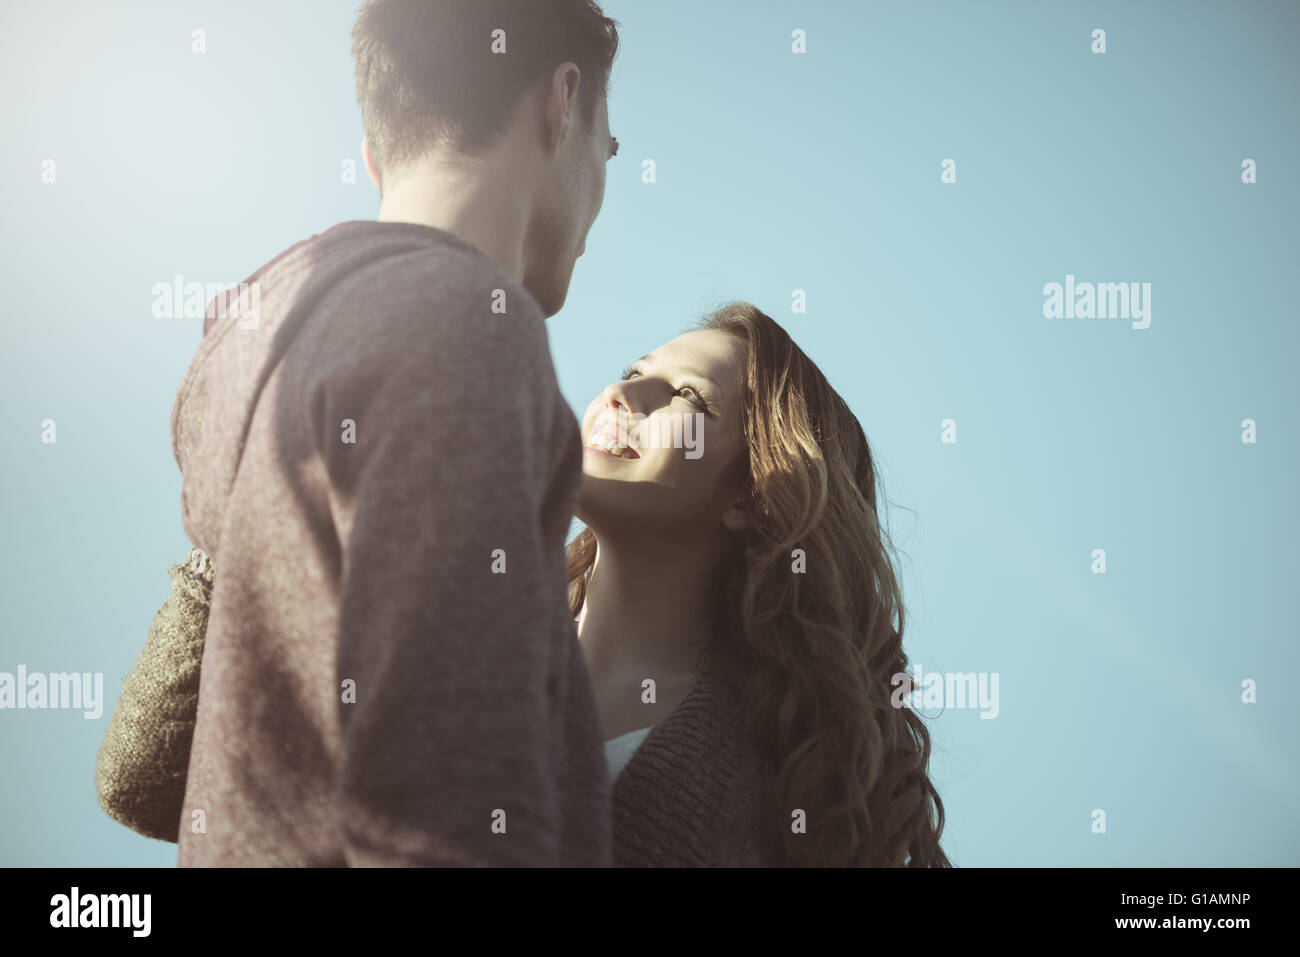 Romantic young teenagers staring at each other against blue sky, love and relationships concept Stock Photo